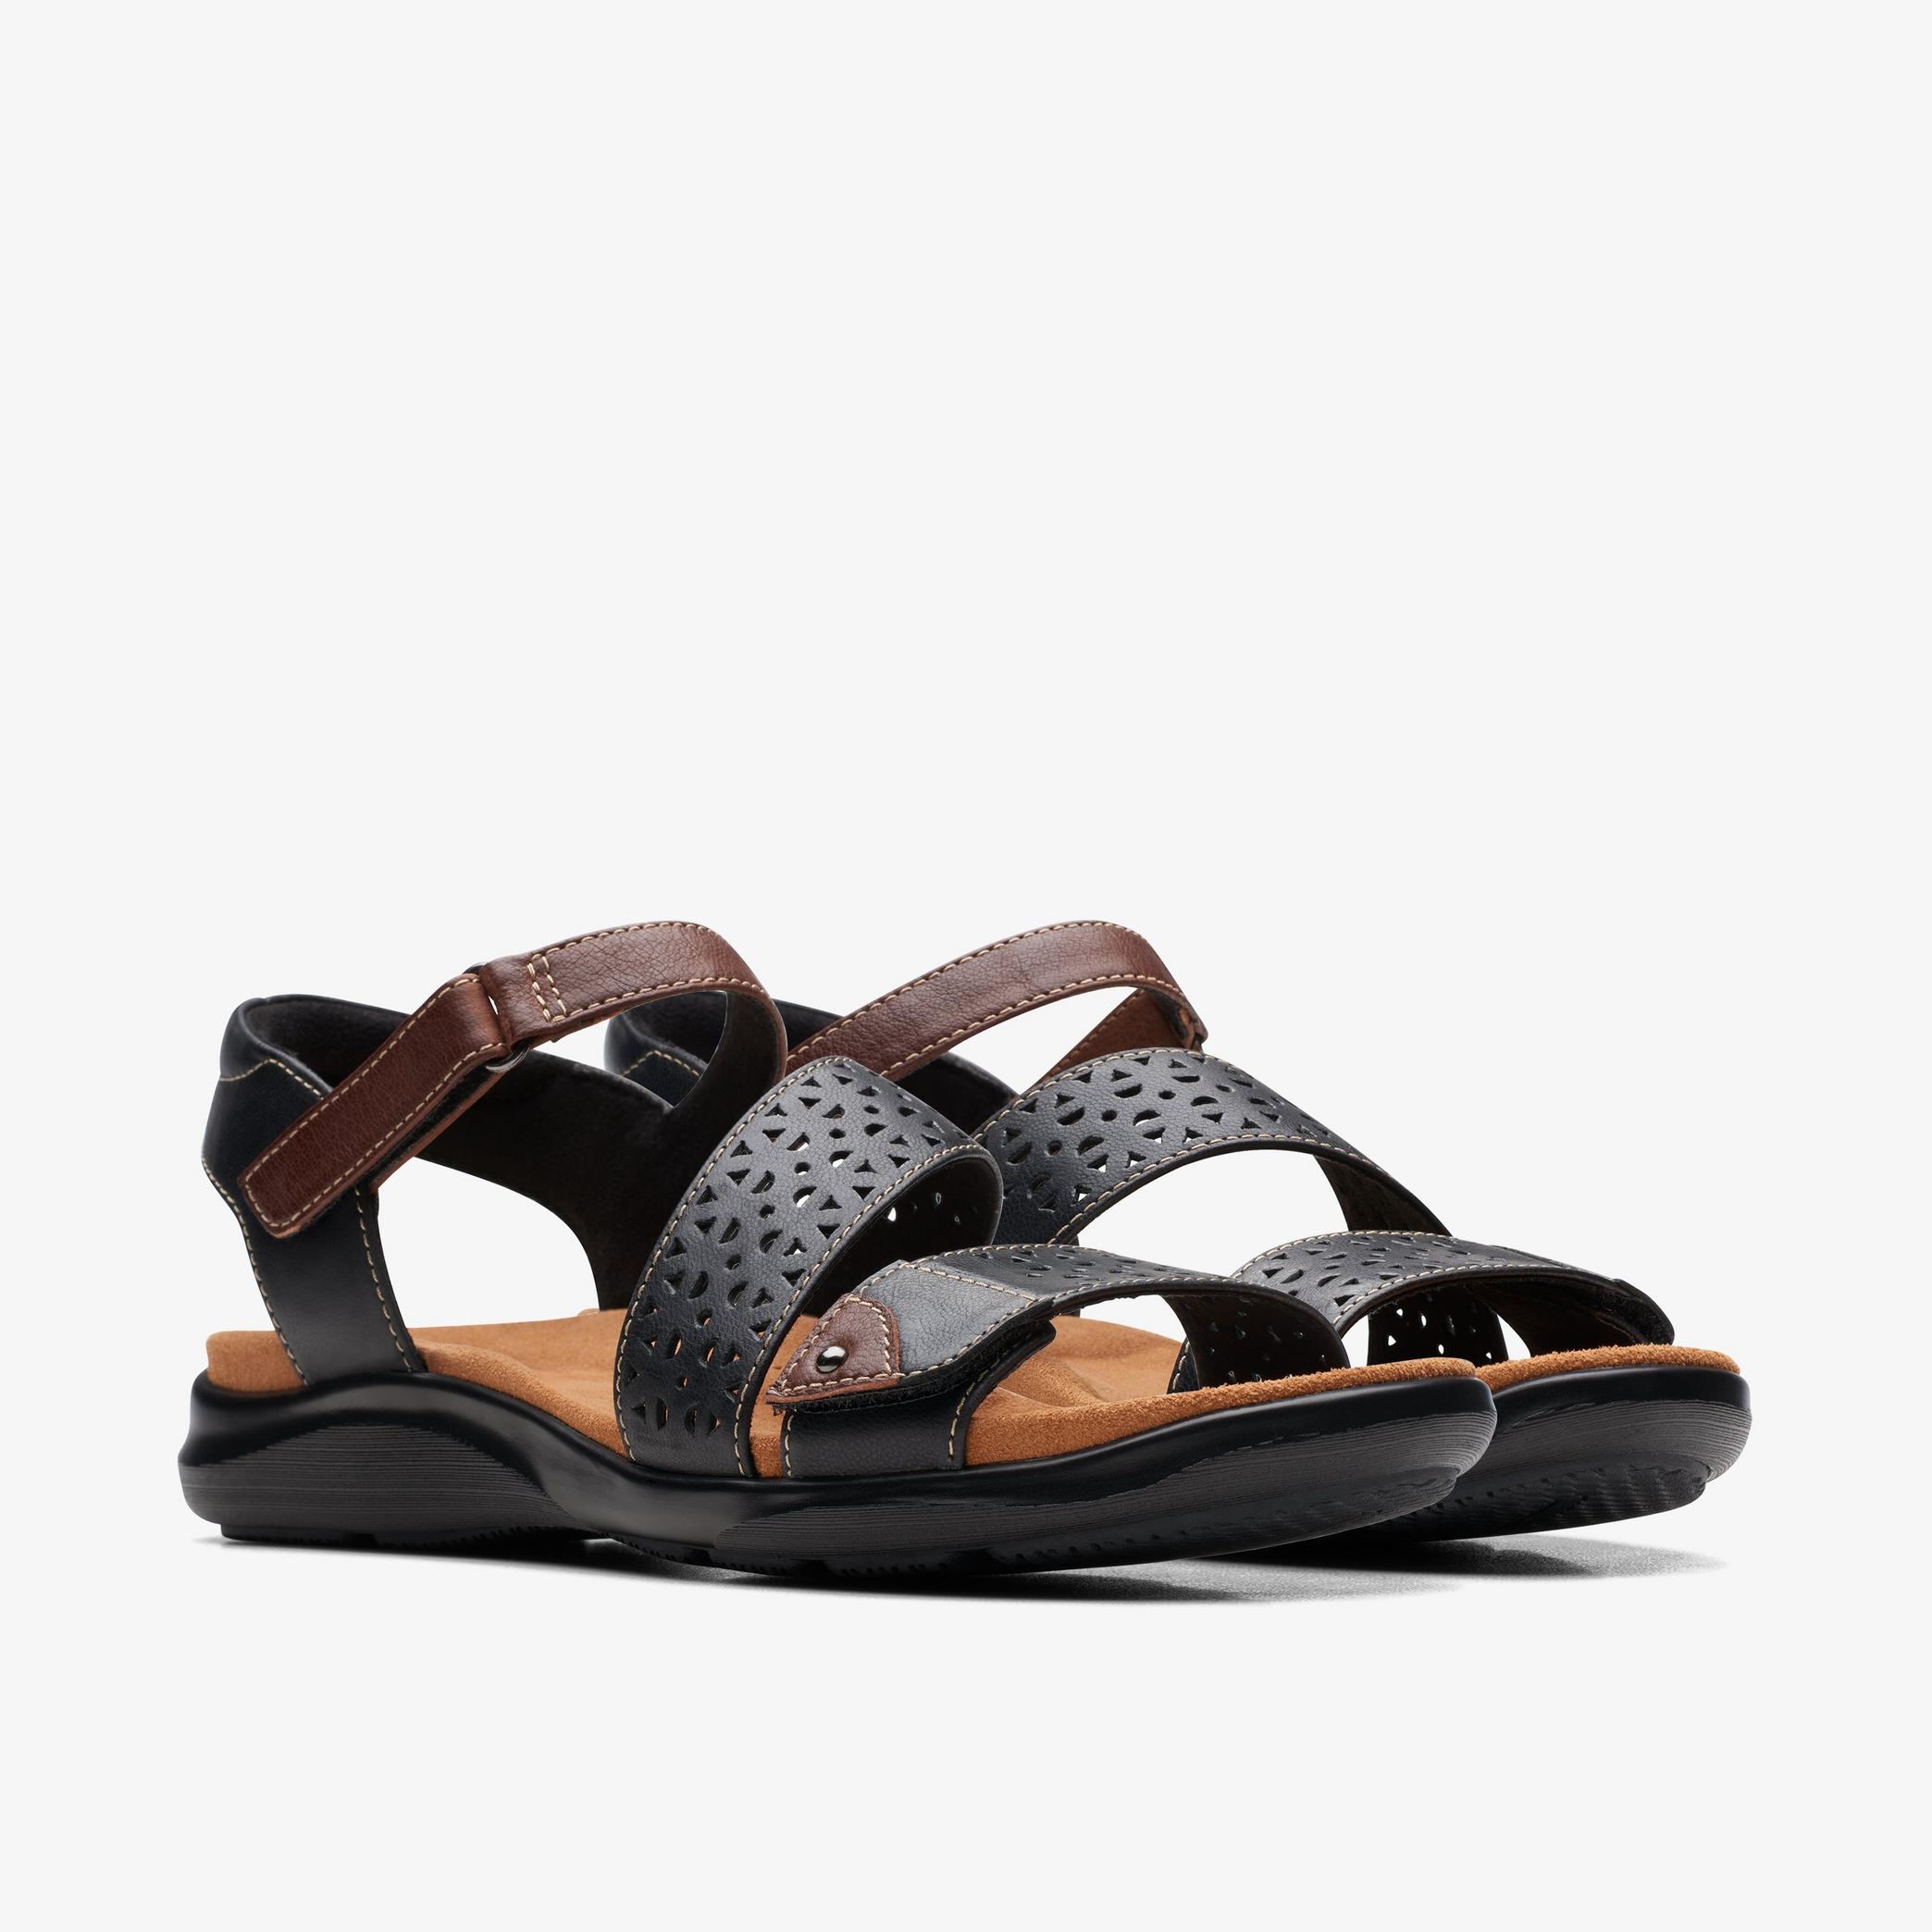 Kitly Way Black Leather Flat Sandals, view 4 of 6